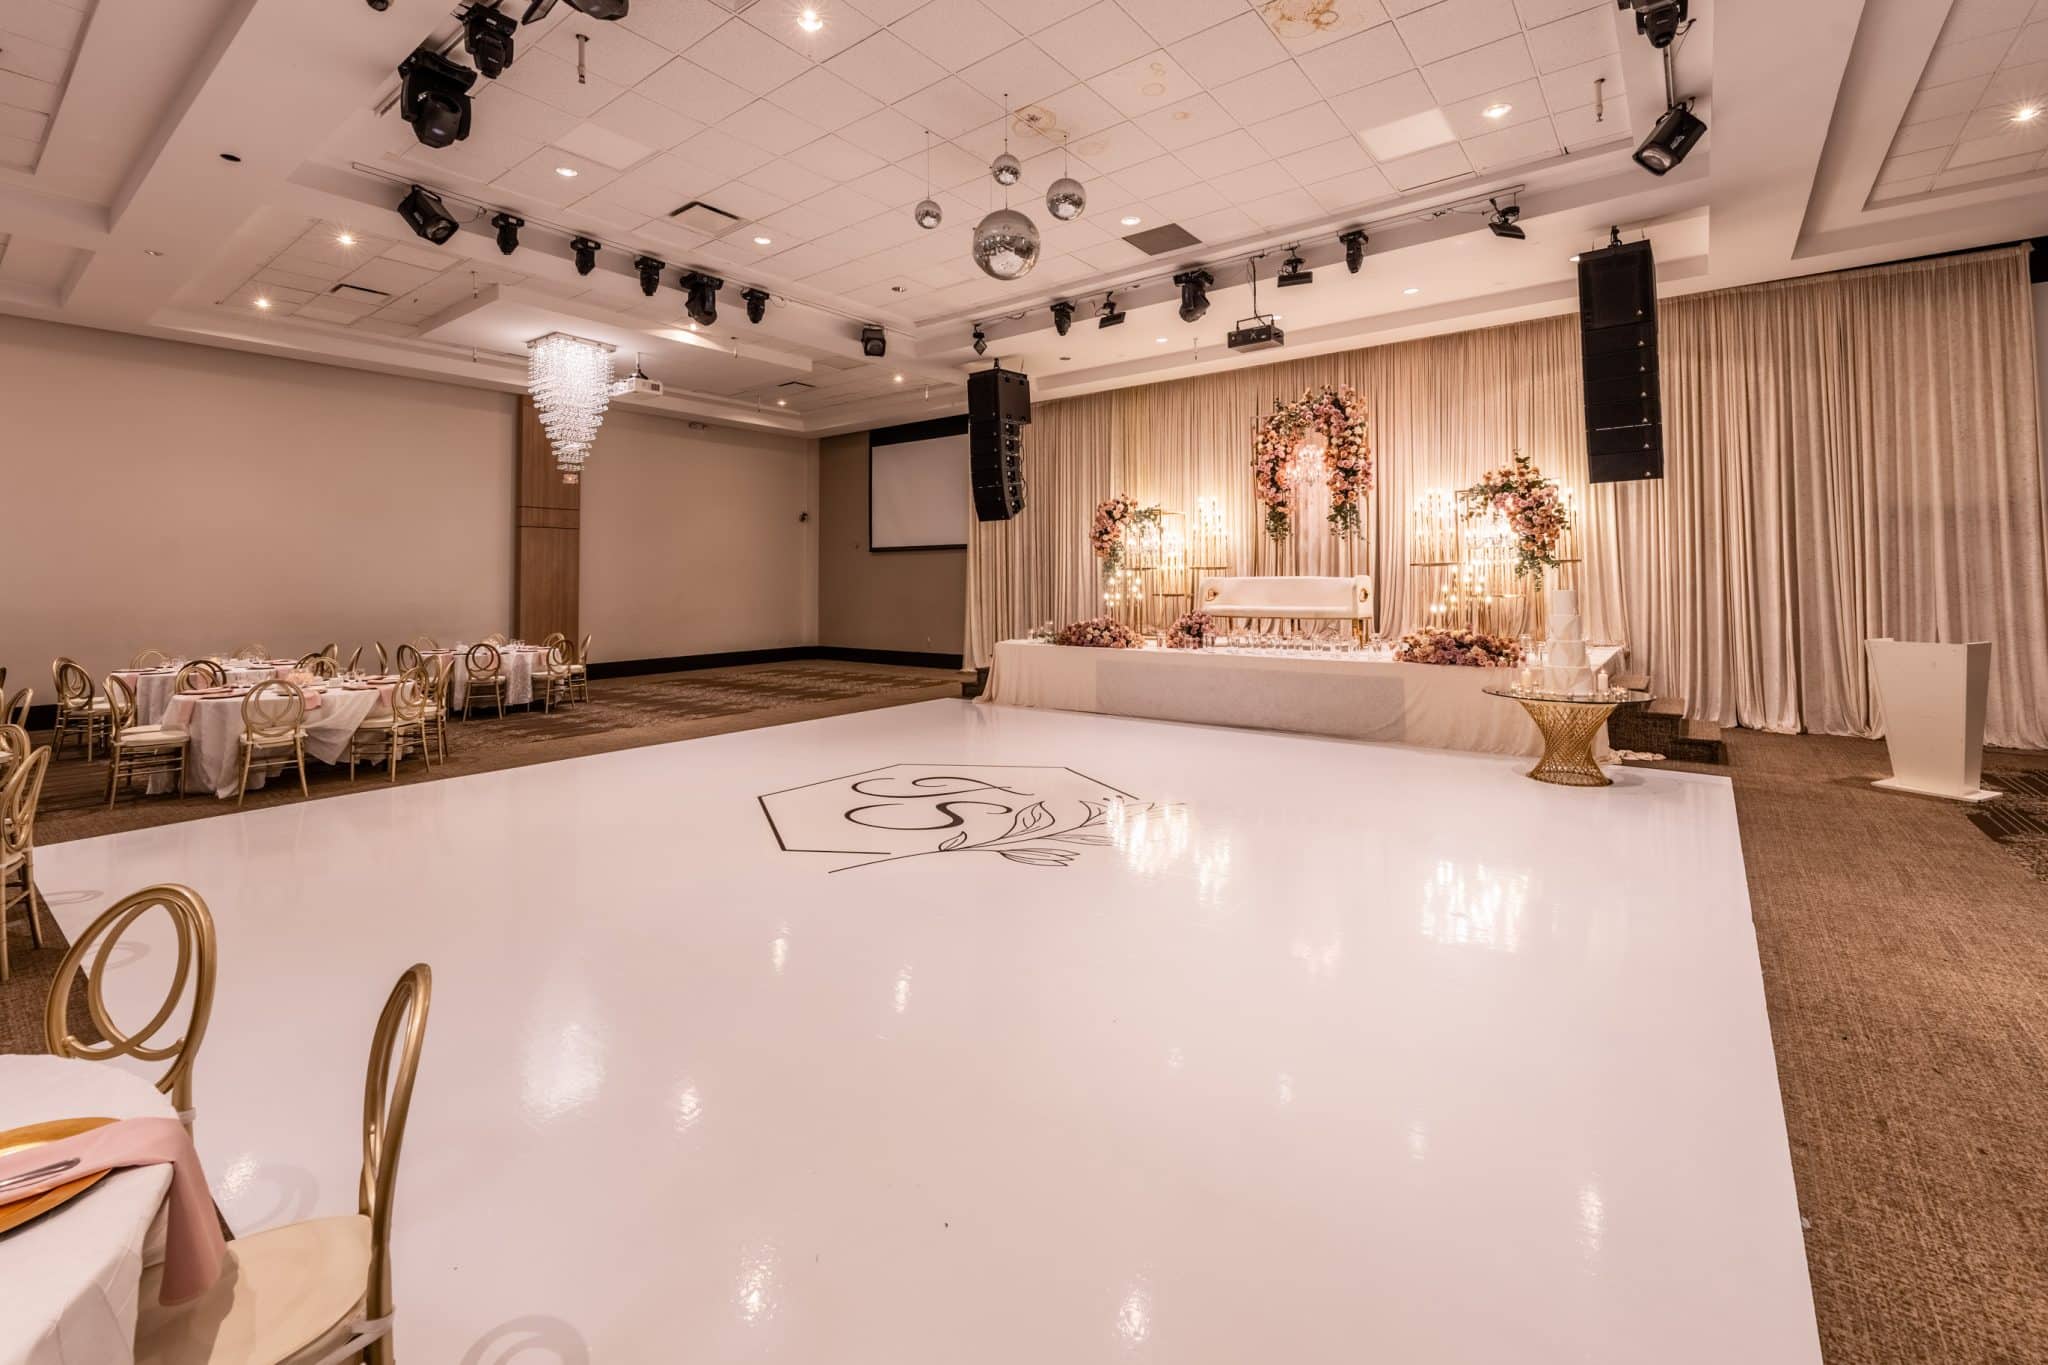 Dance floor and front stage